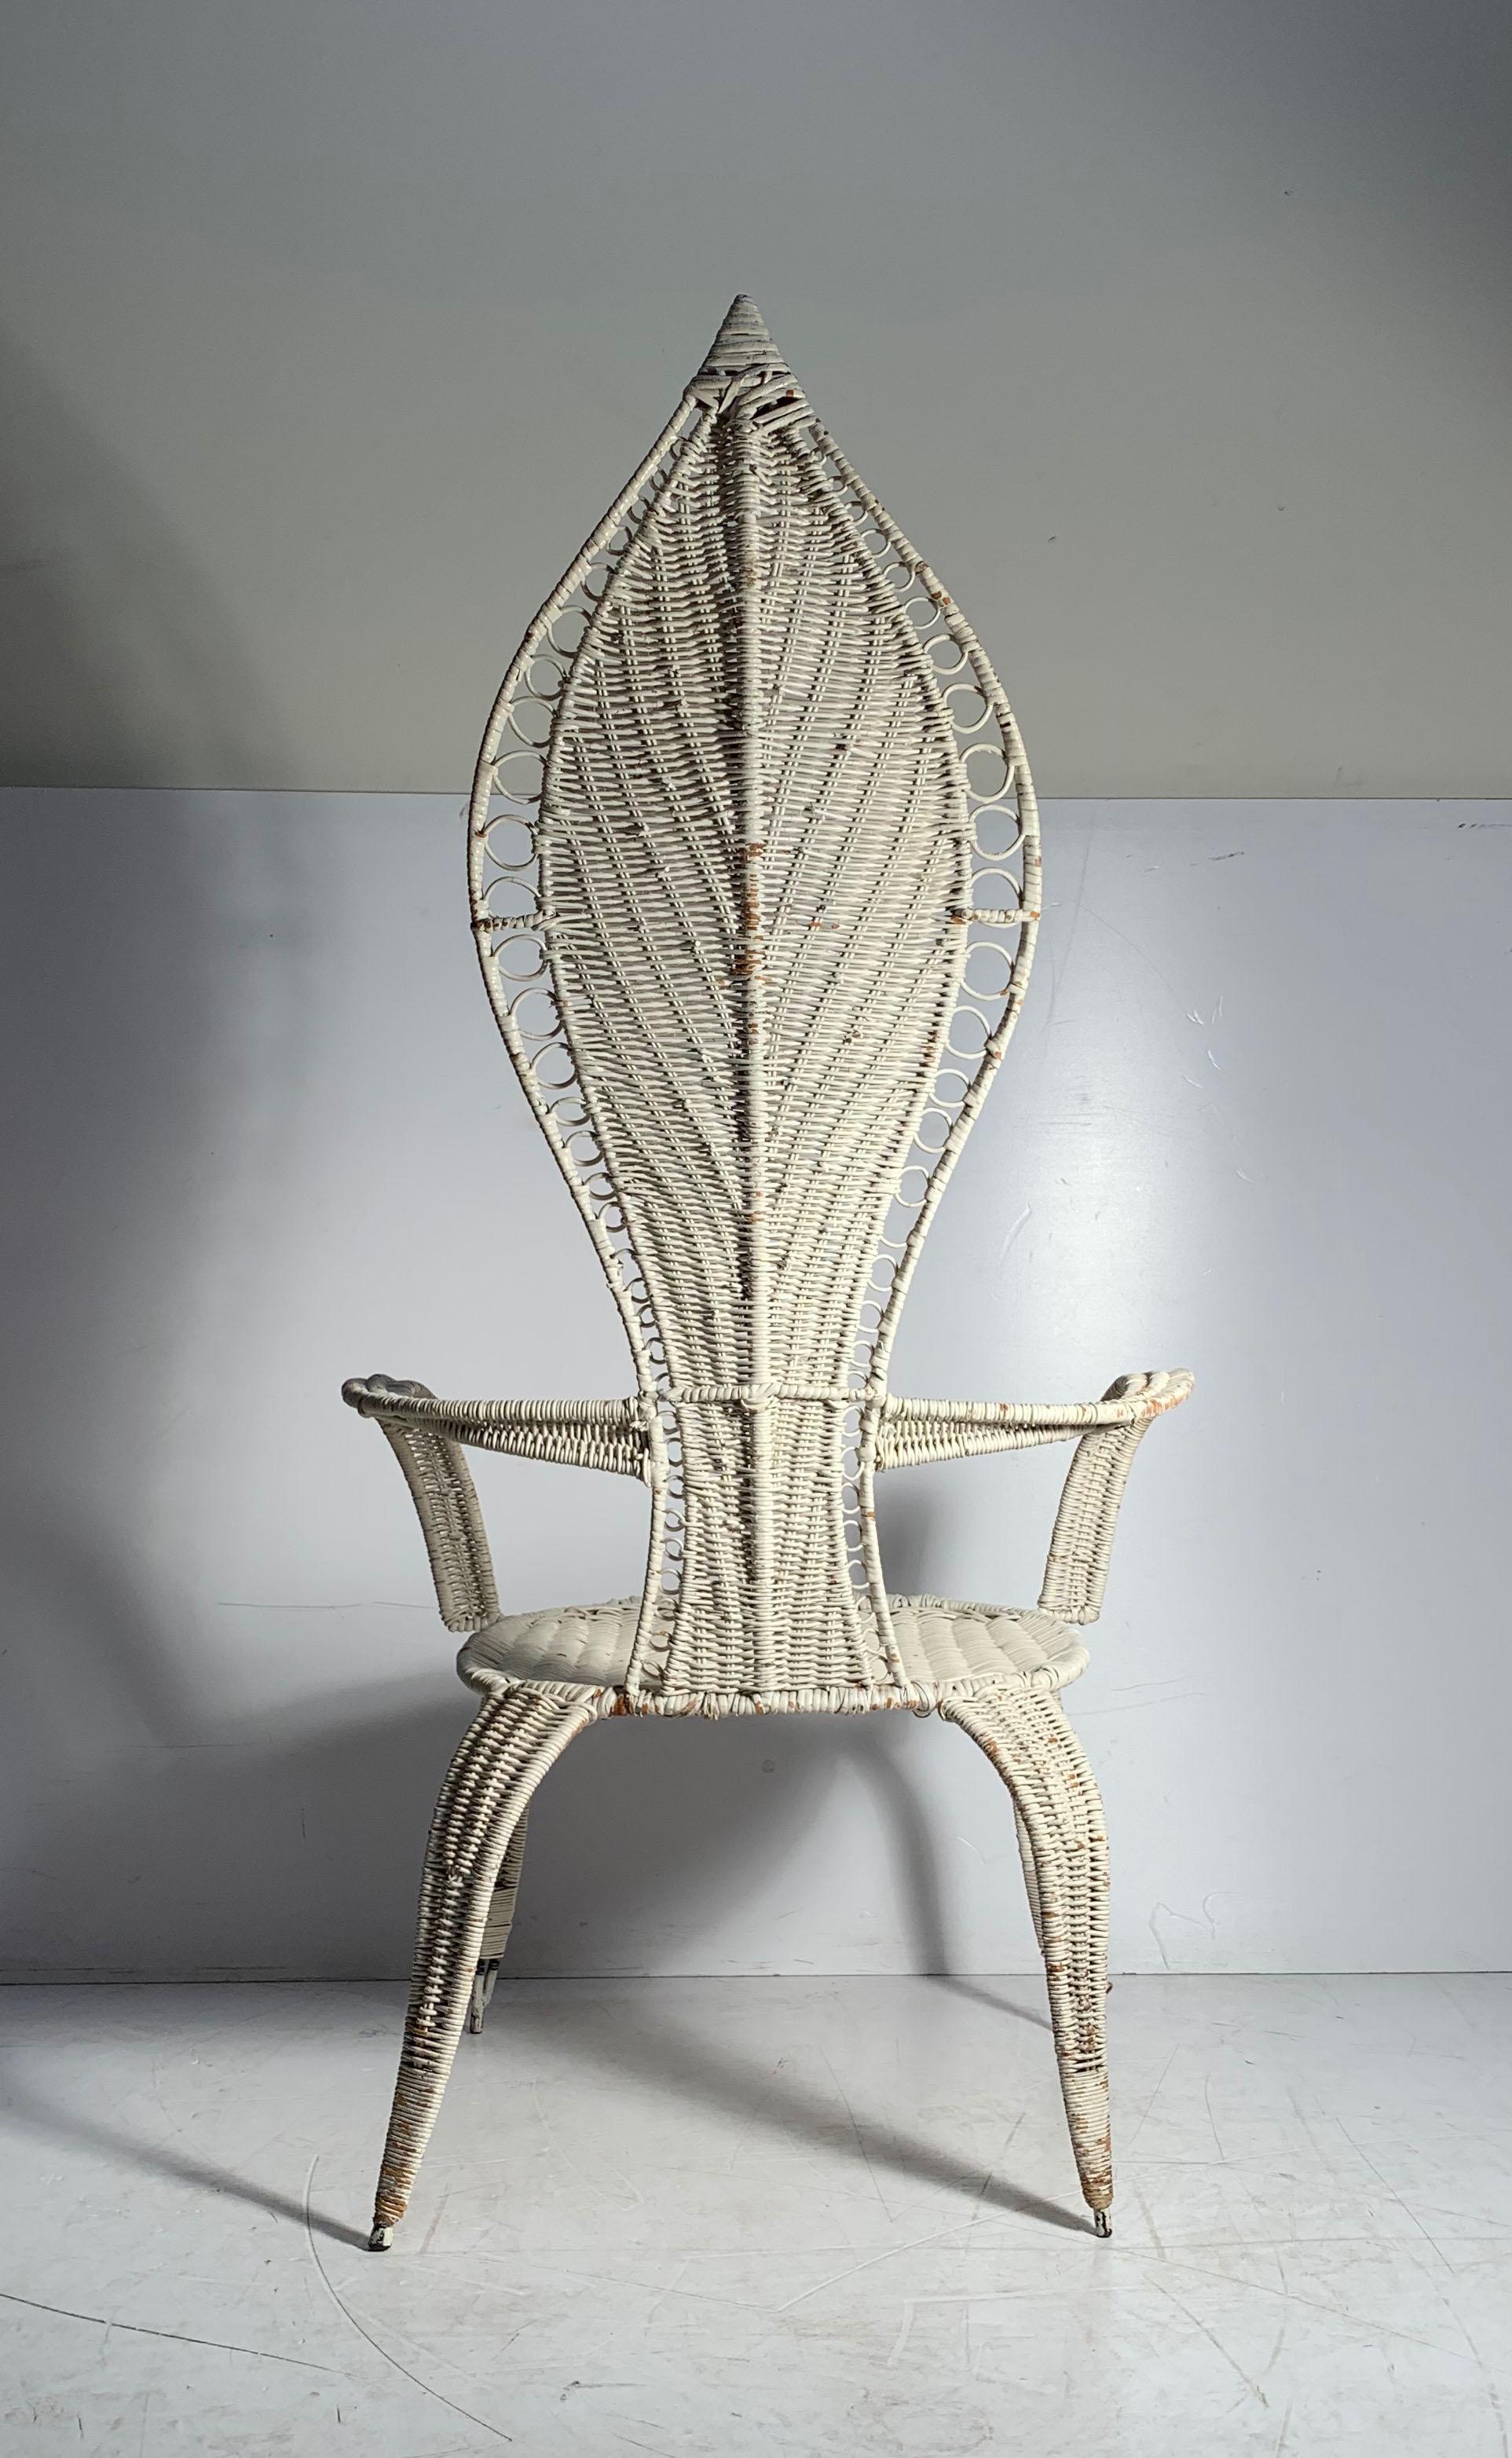 20th Century Tropi-Cal Danny Ho Fong and Miller Fong Mid-Century Modern Garden Patio Chair For Sale